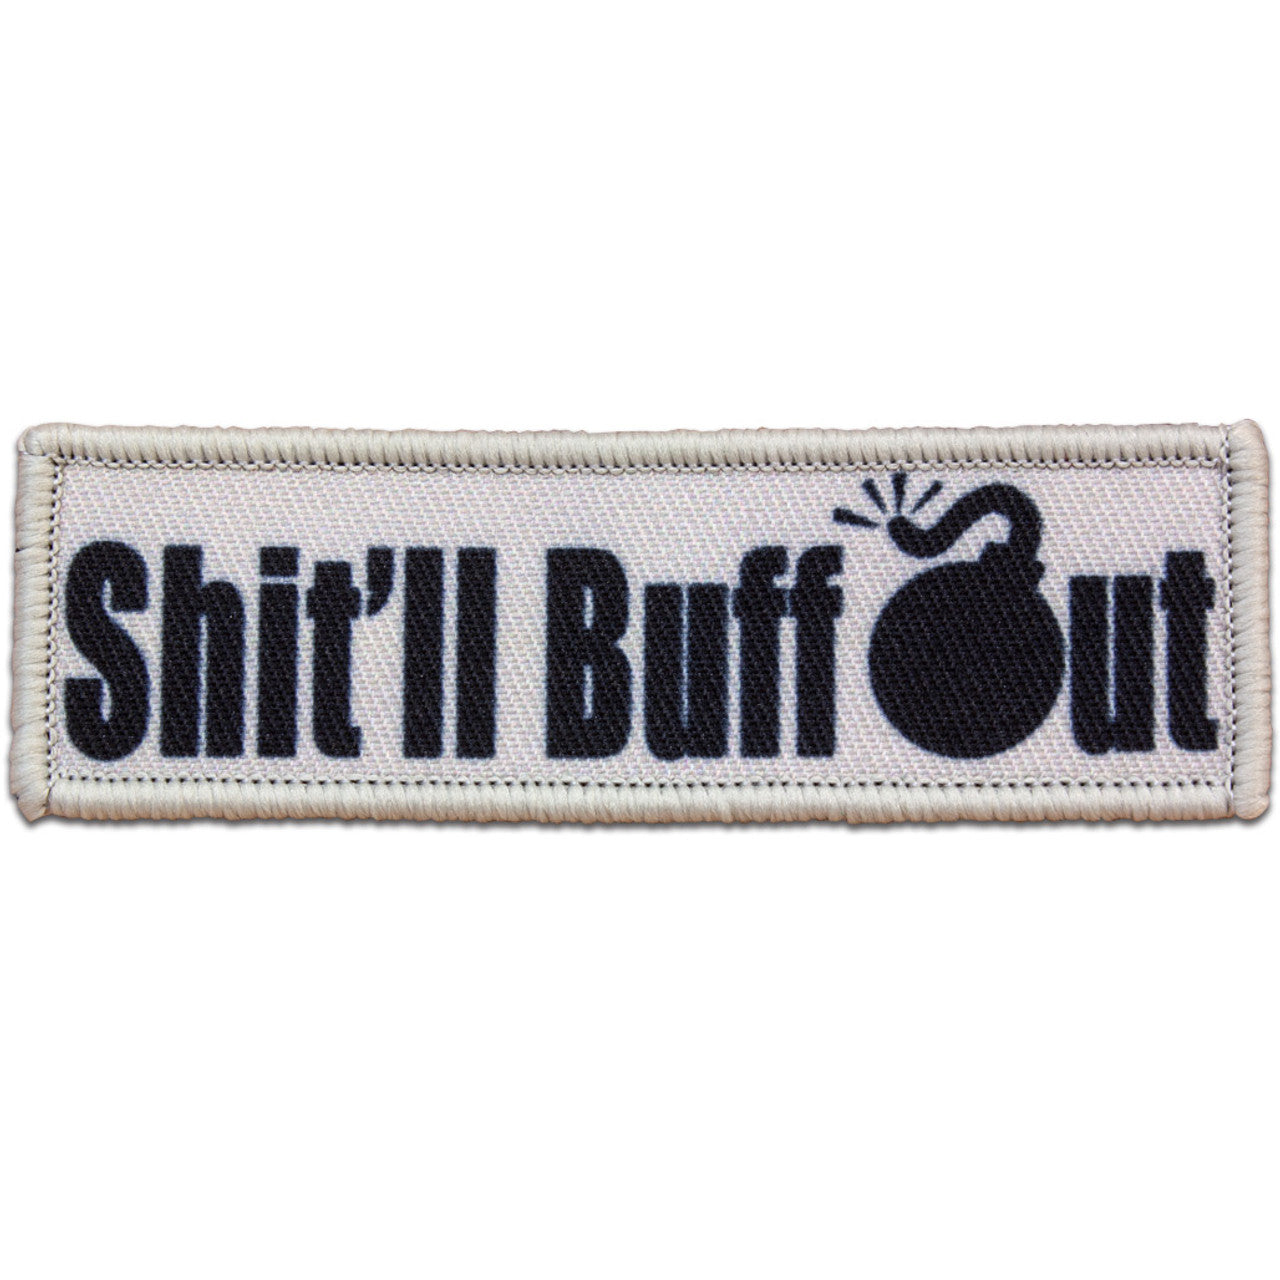 "SHIT'LL BUFF OUT" MORALE PATCH